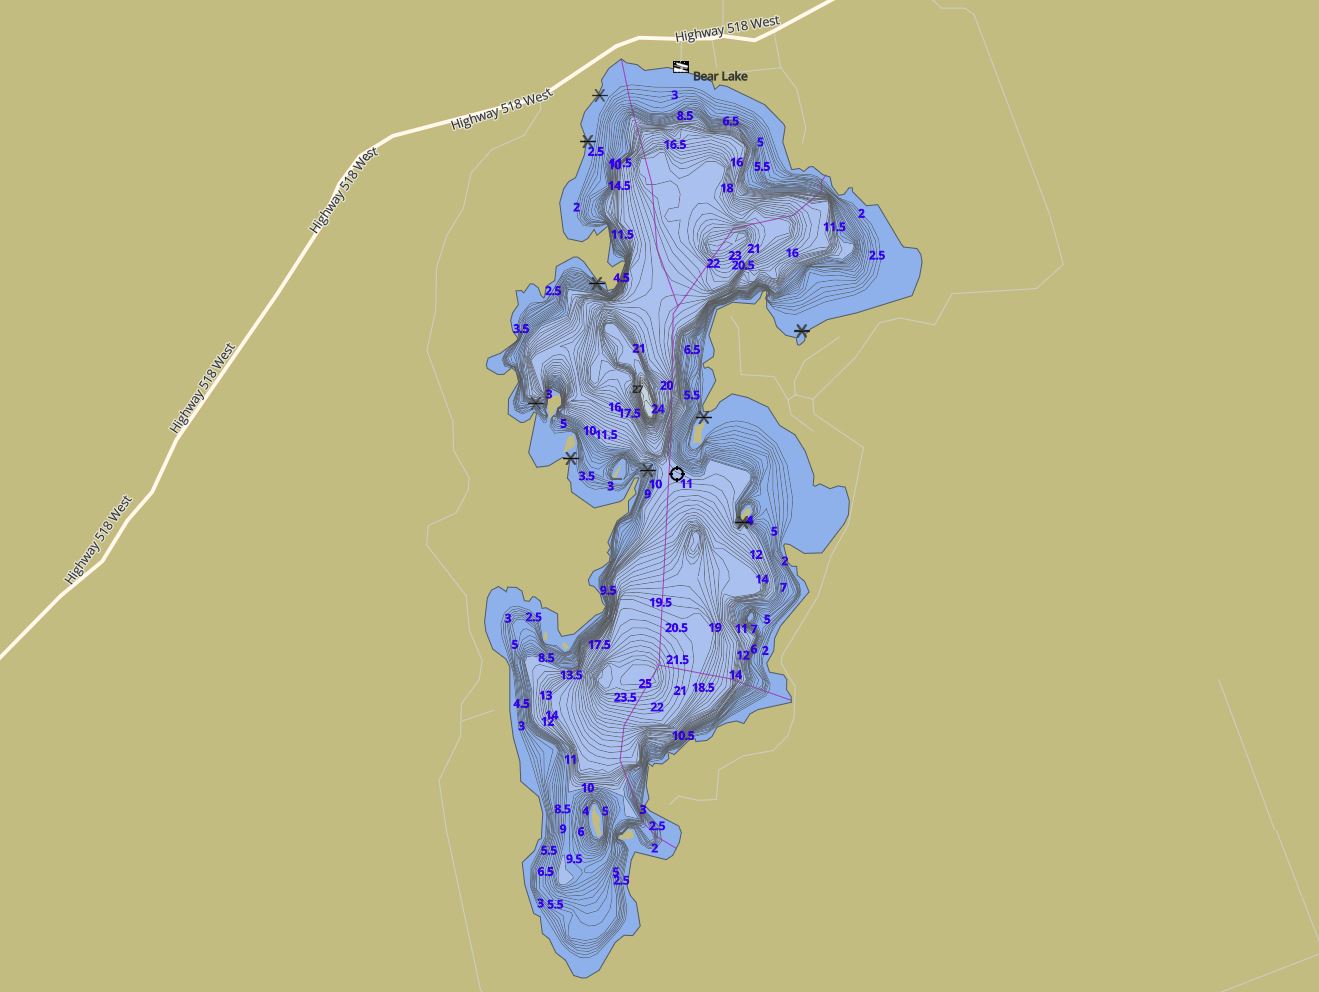 Contour Map of Bear Lake in Municipality of McMurrich and the District of Parry Sound